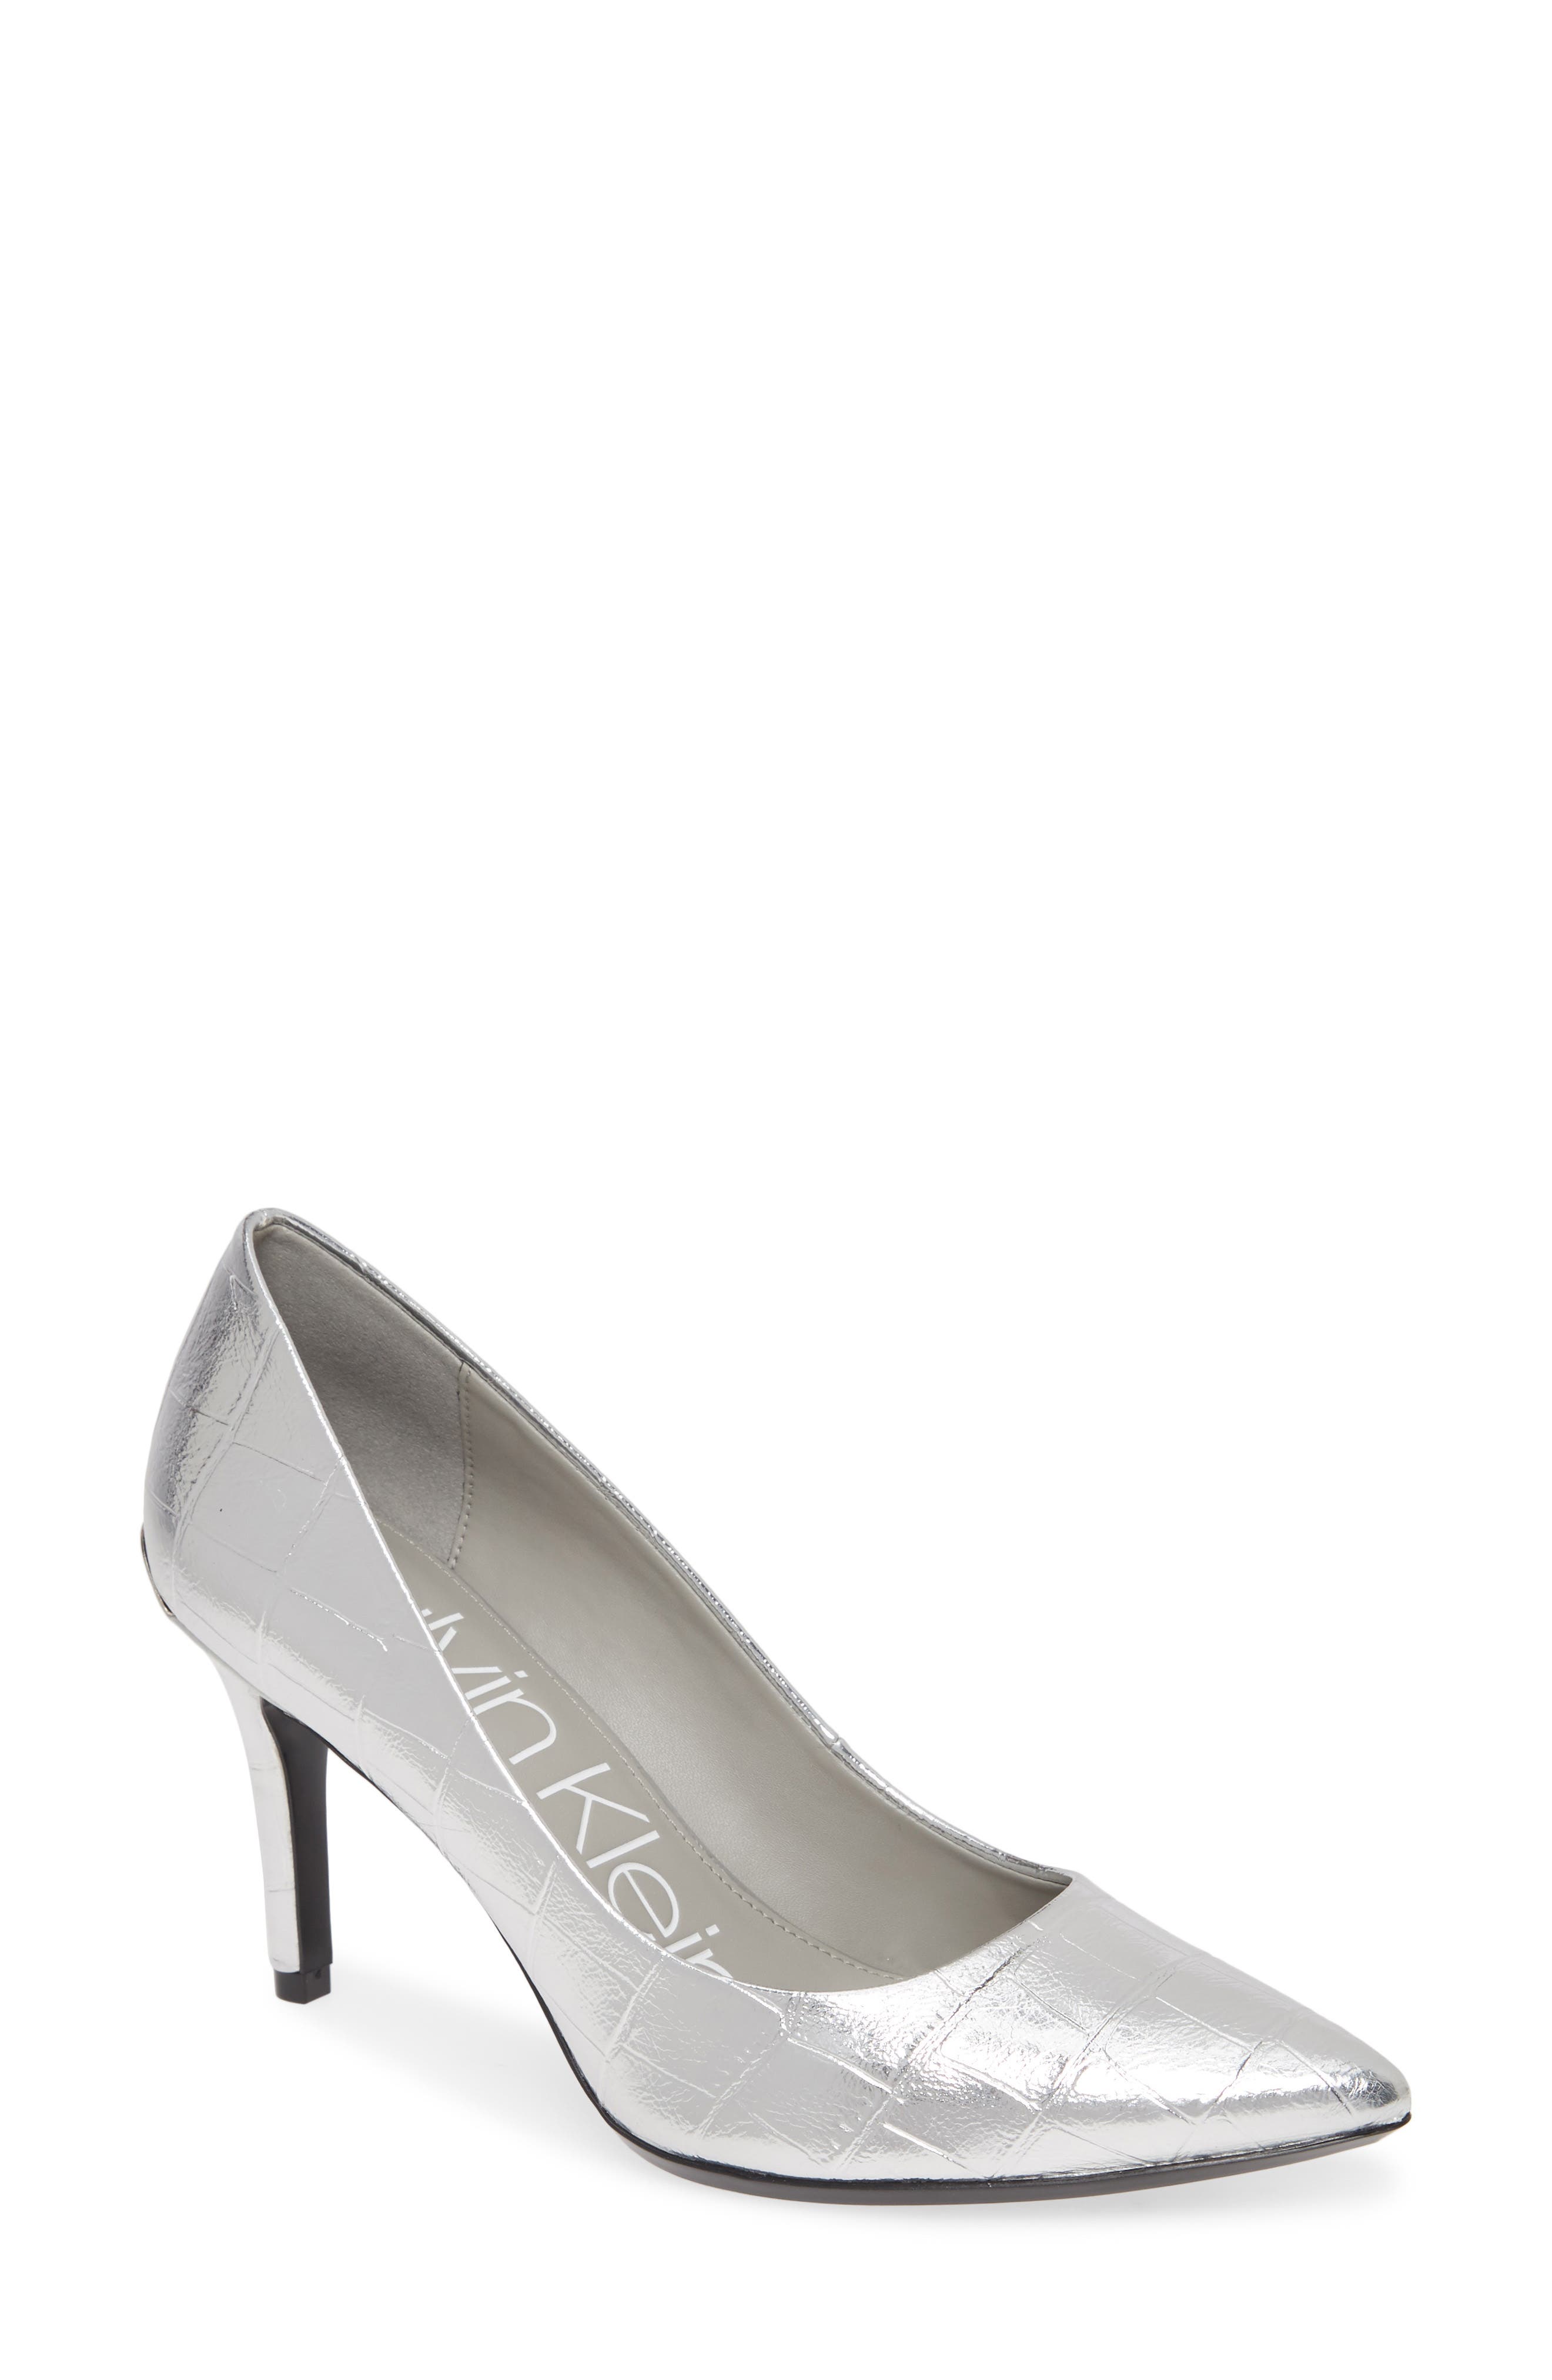 Calvin Klein Gayle Pointed Toe Pump In Silver Croco Embossed Leather